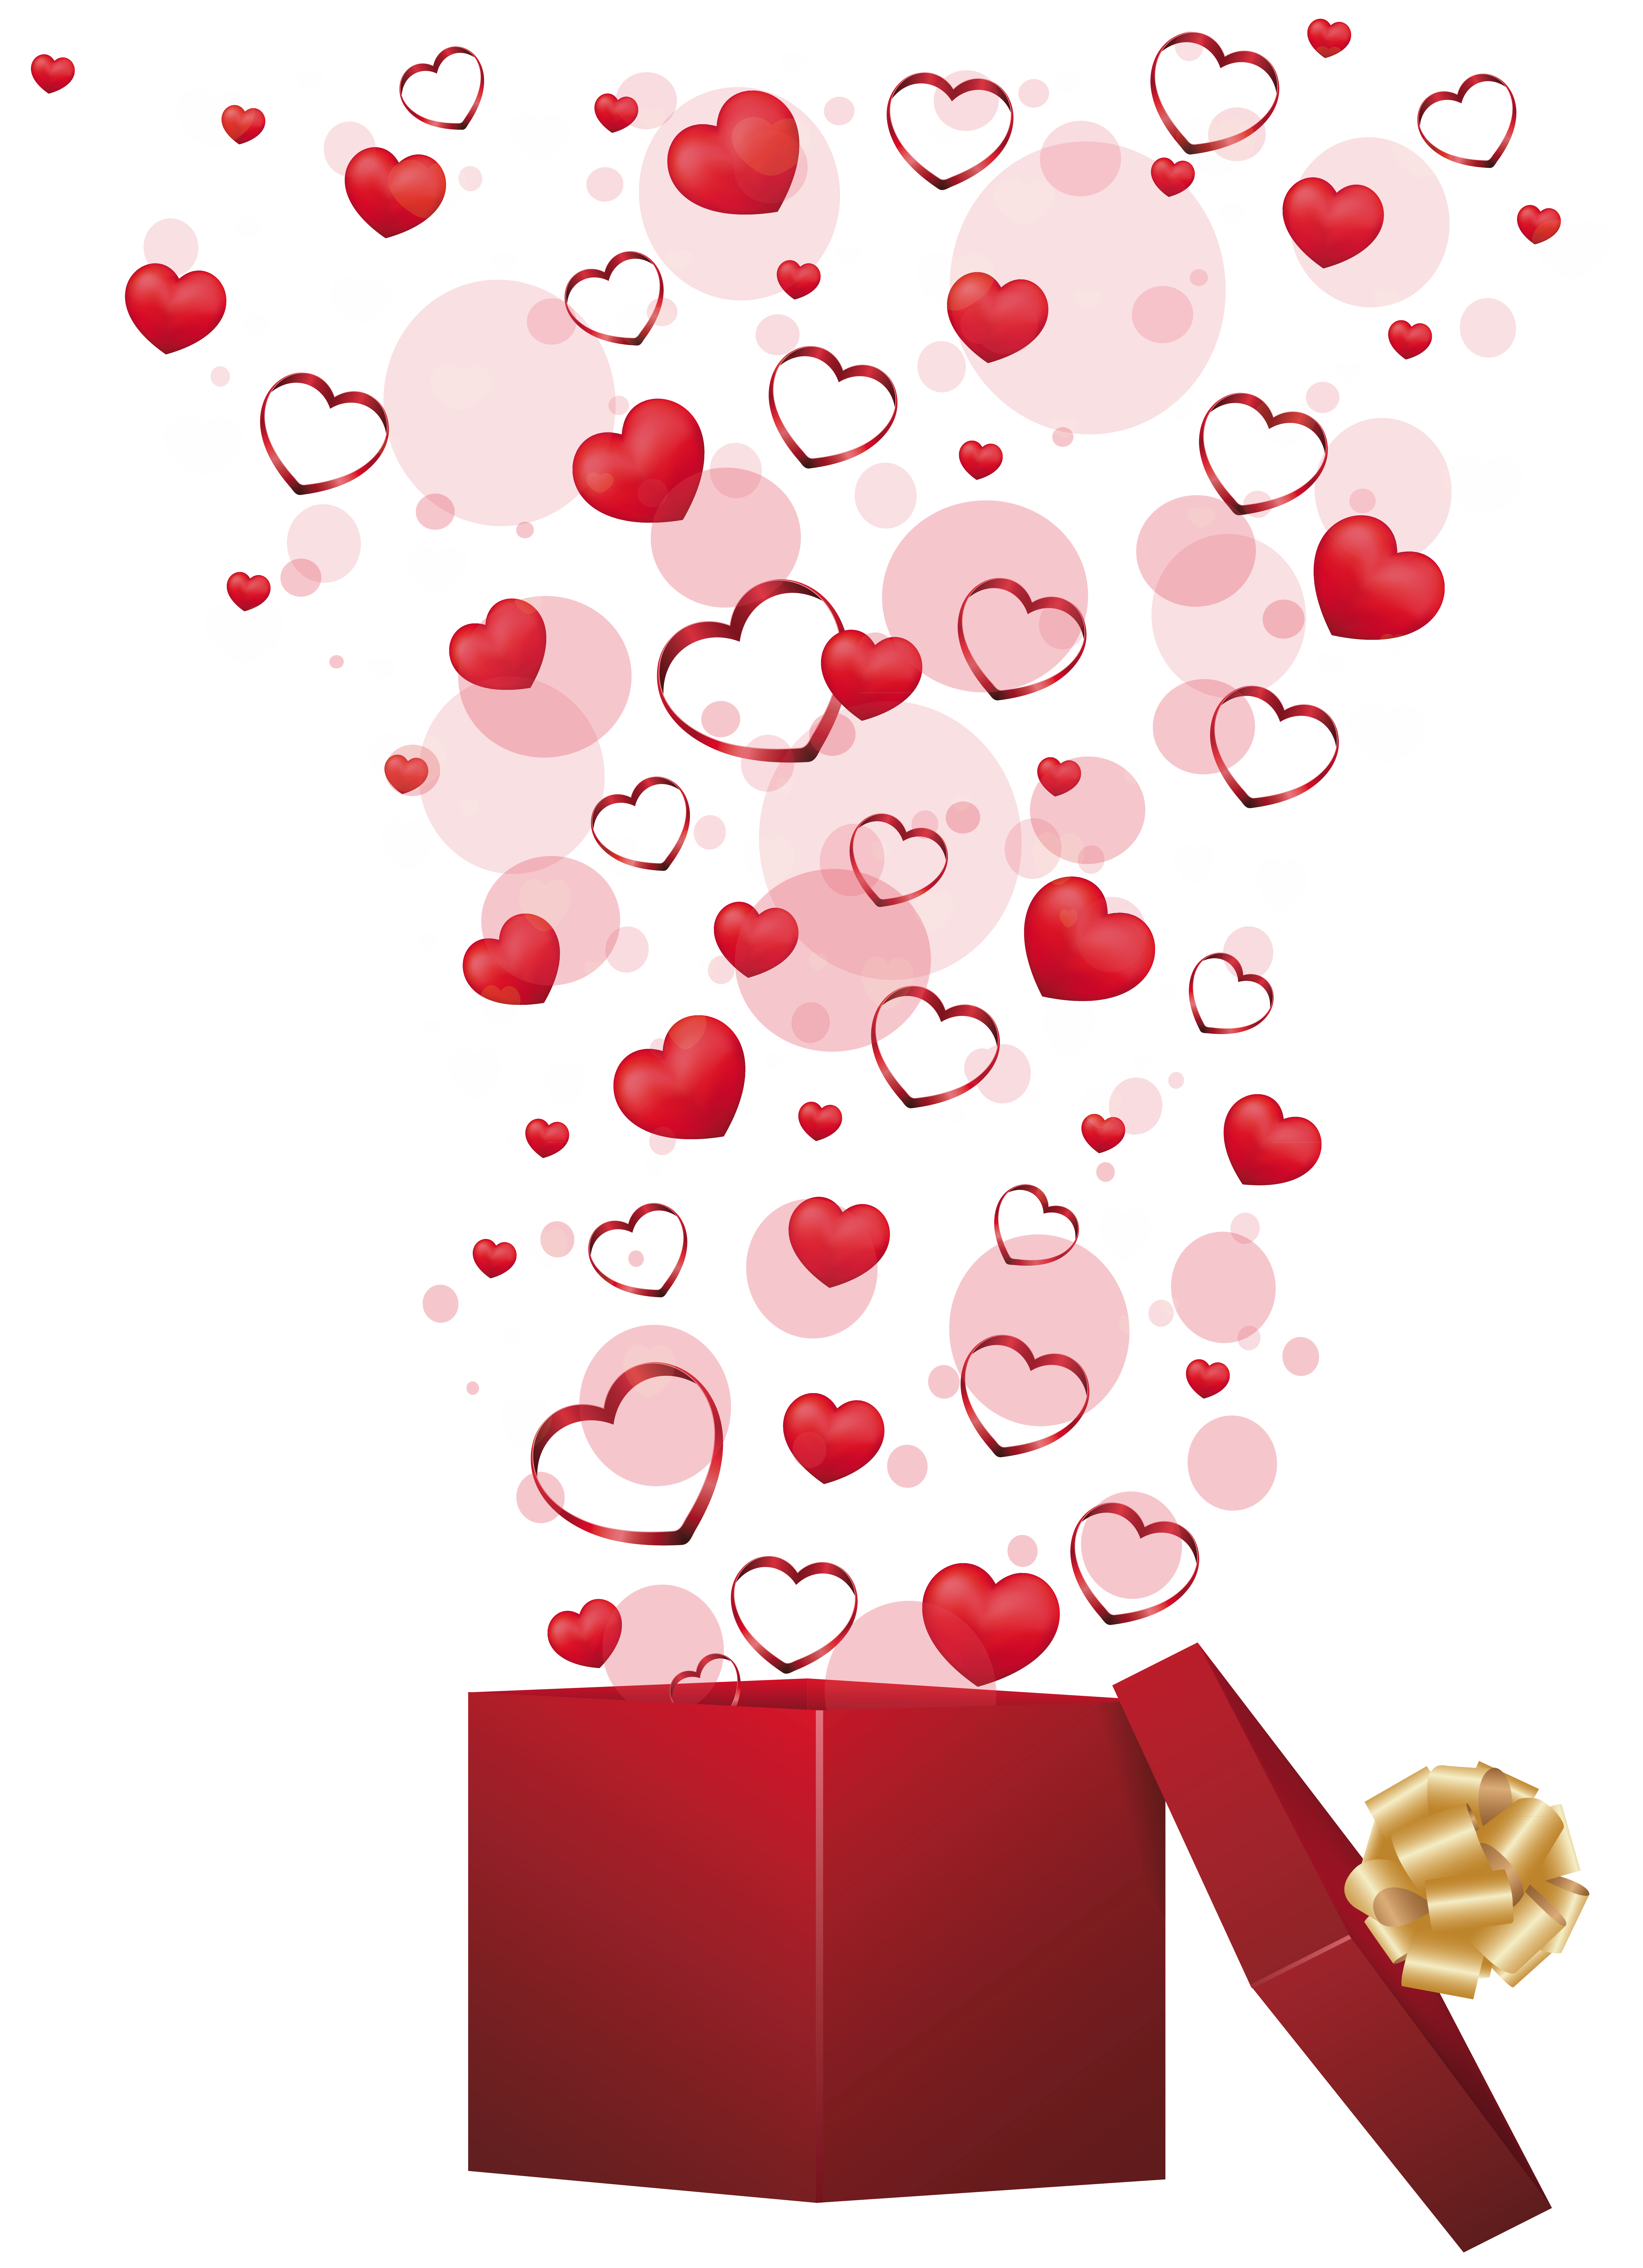 Red_Gift_with_Hearts_PNG_Clipart_Picture.png